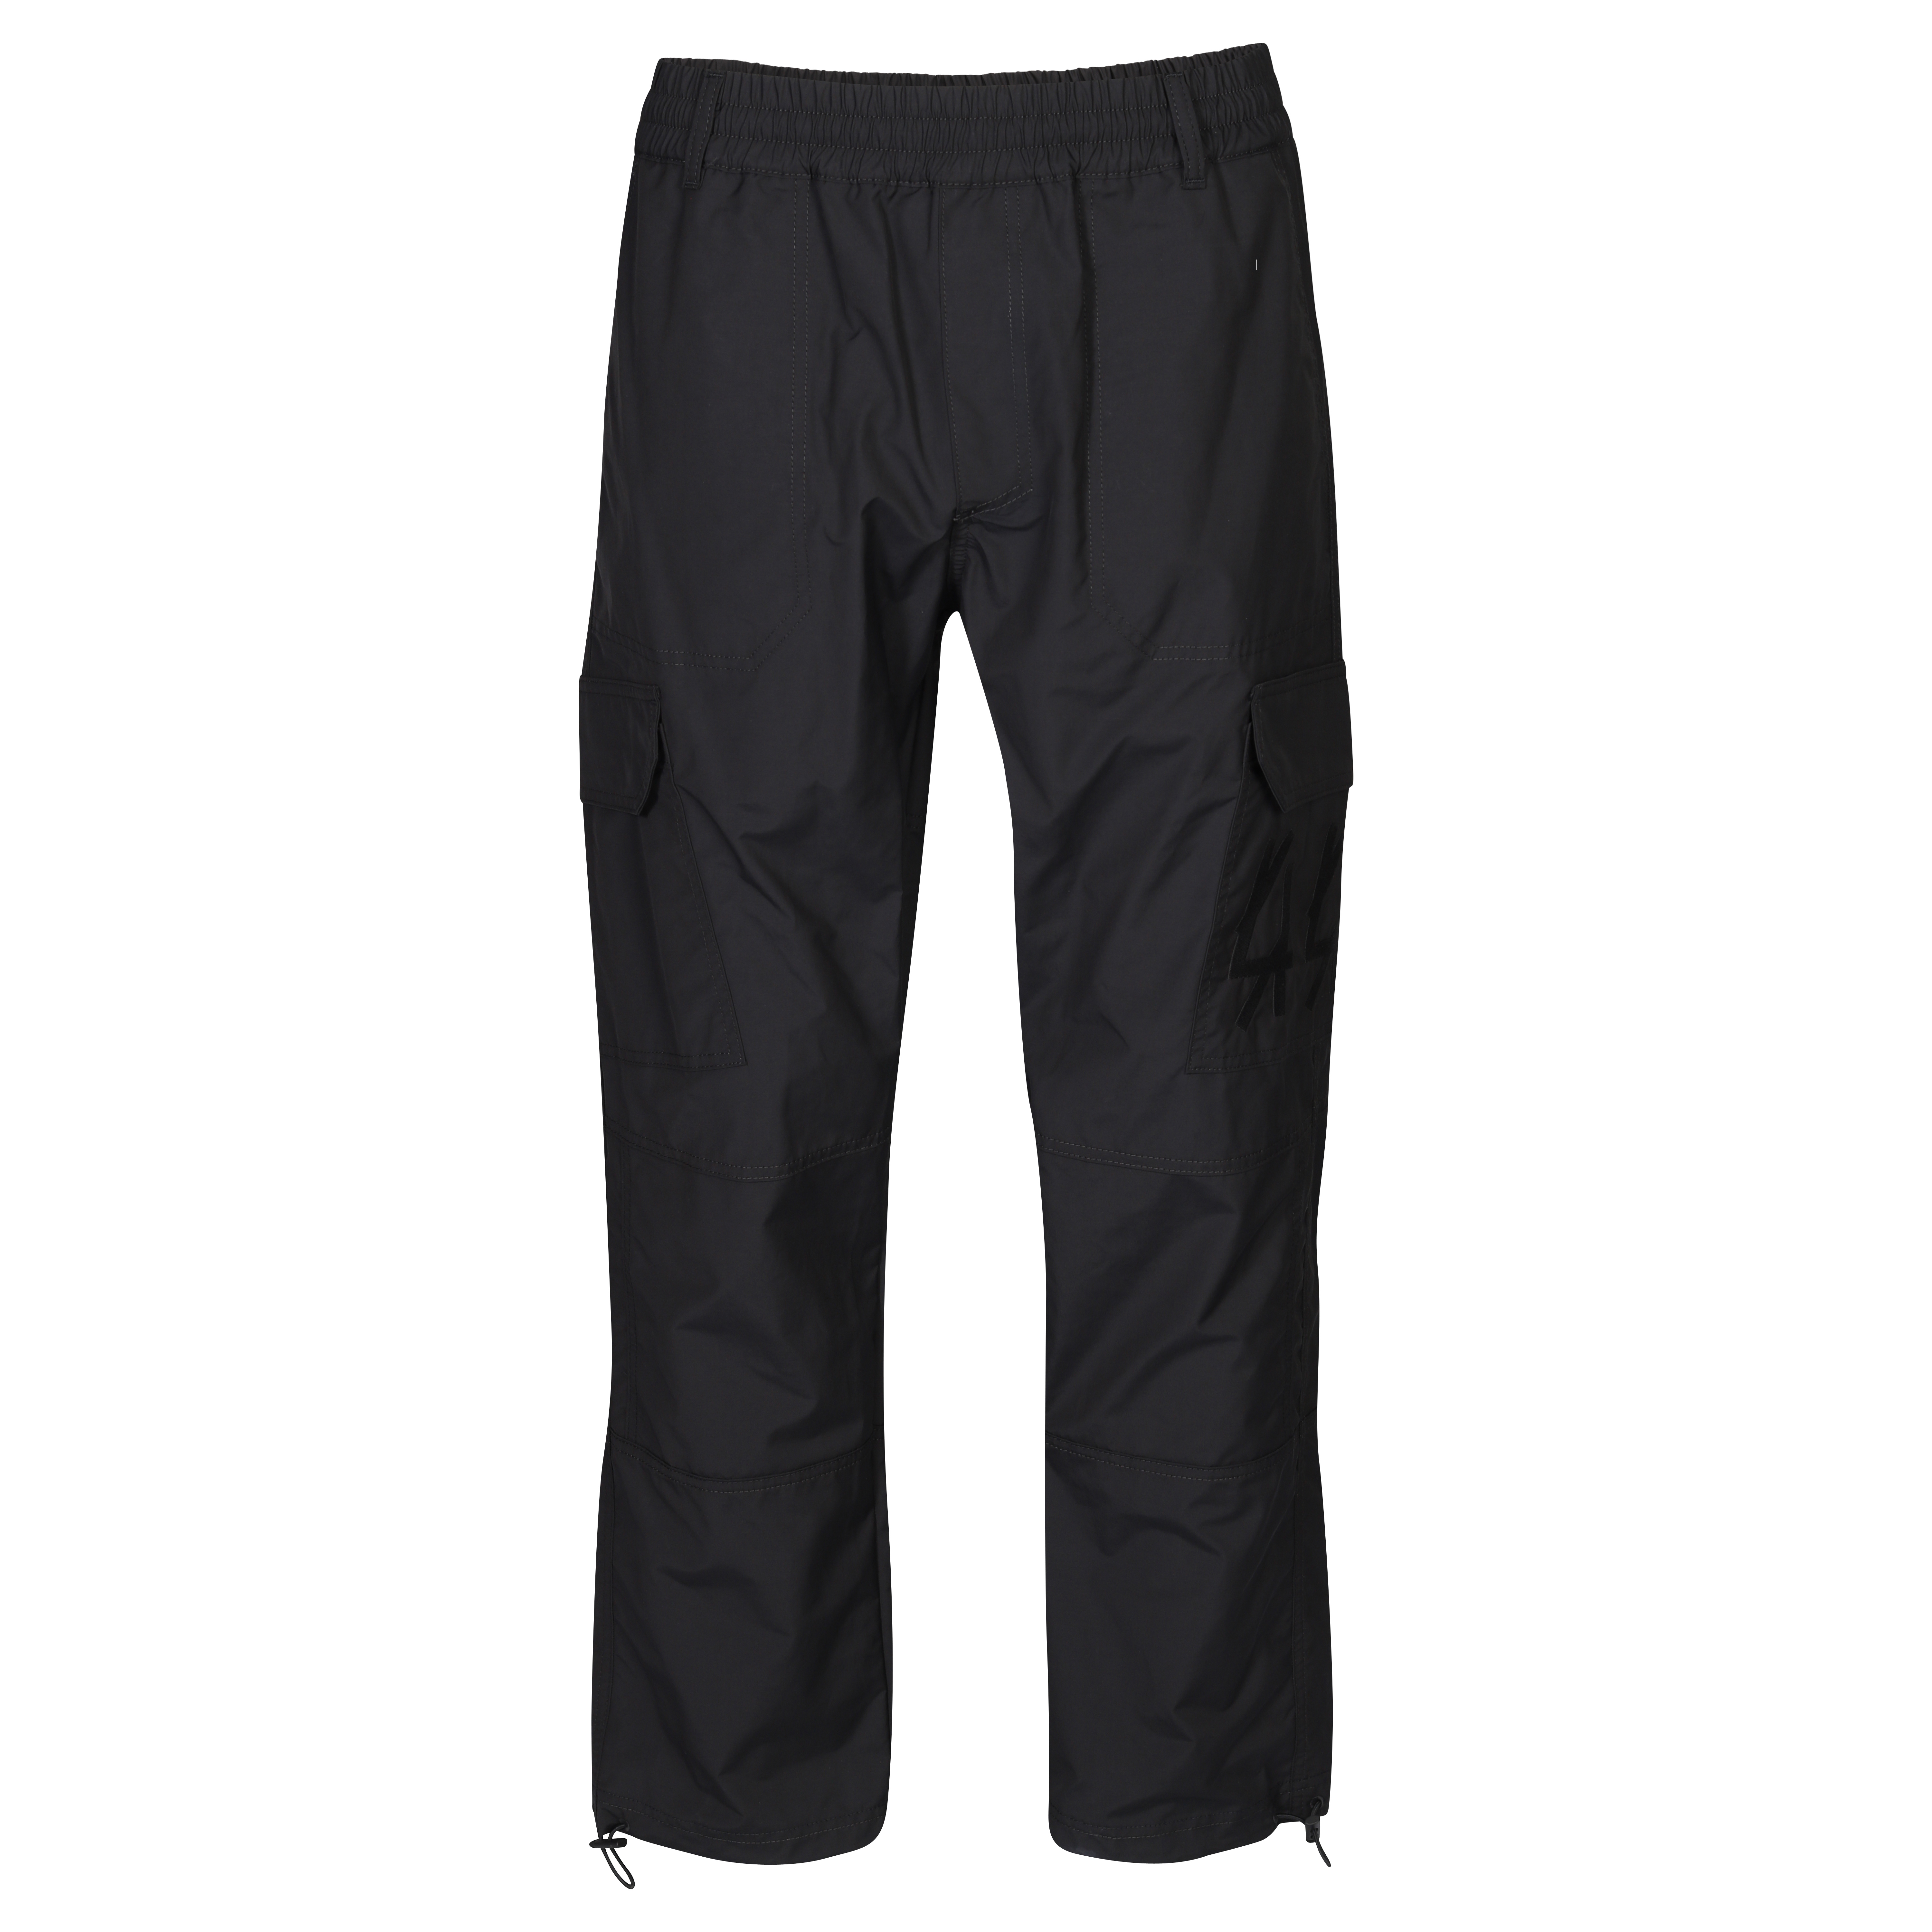 44 Label Group Think Solid Cargo Trousers in Black 46